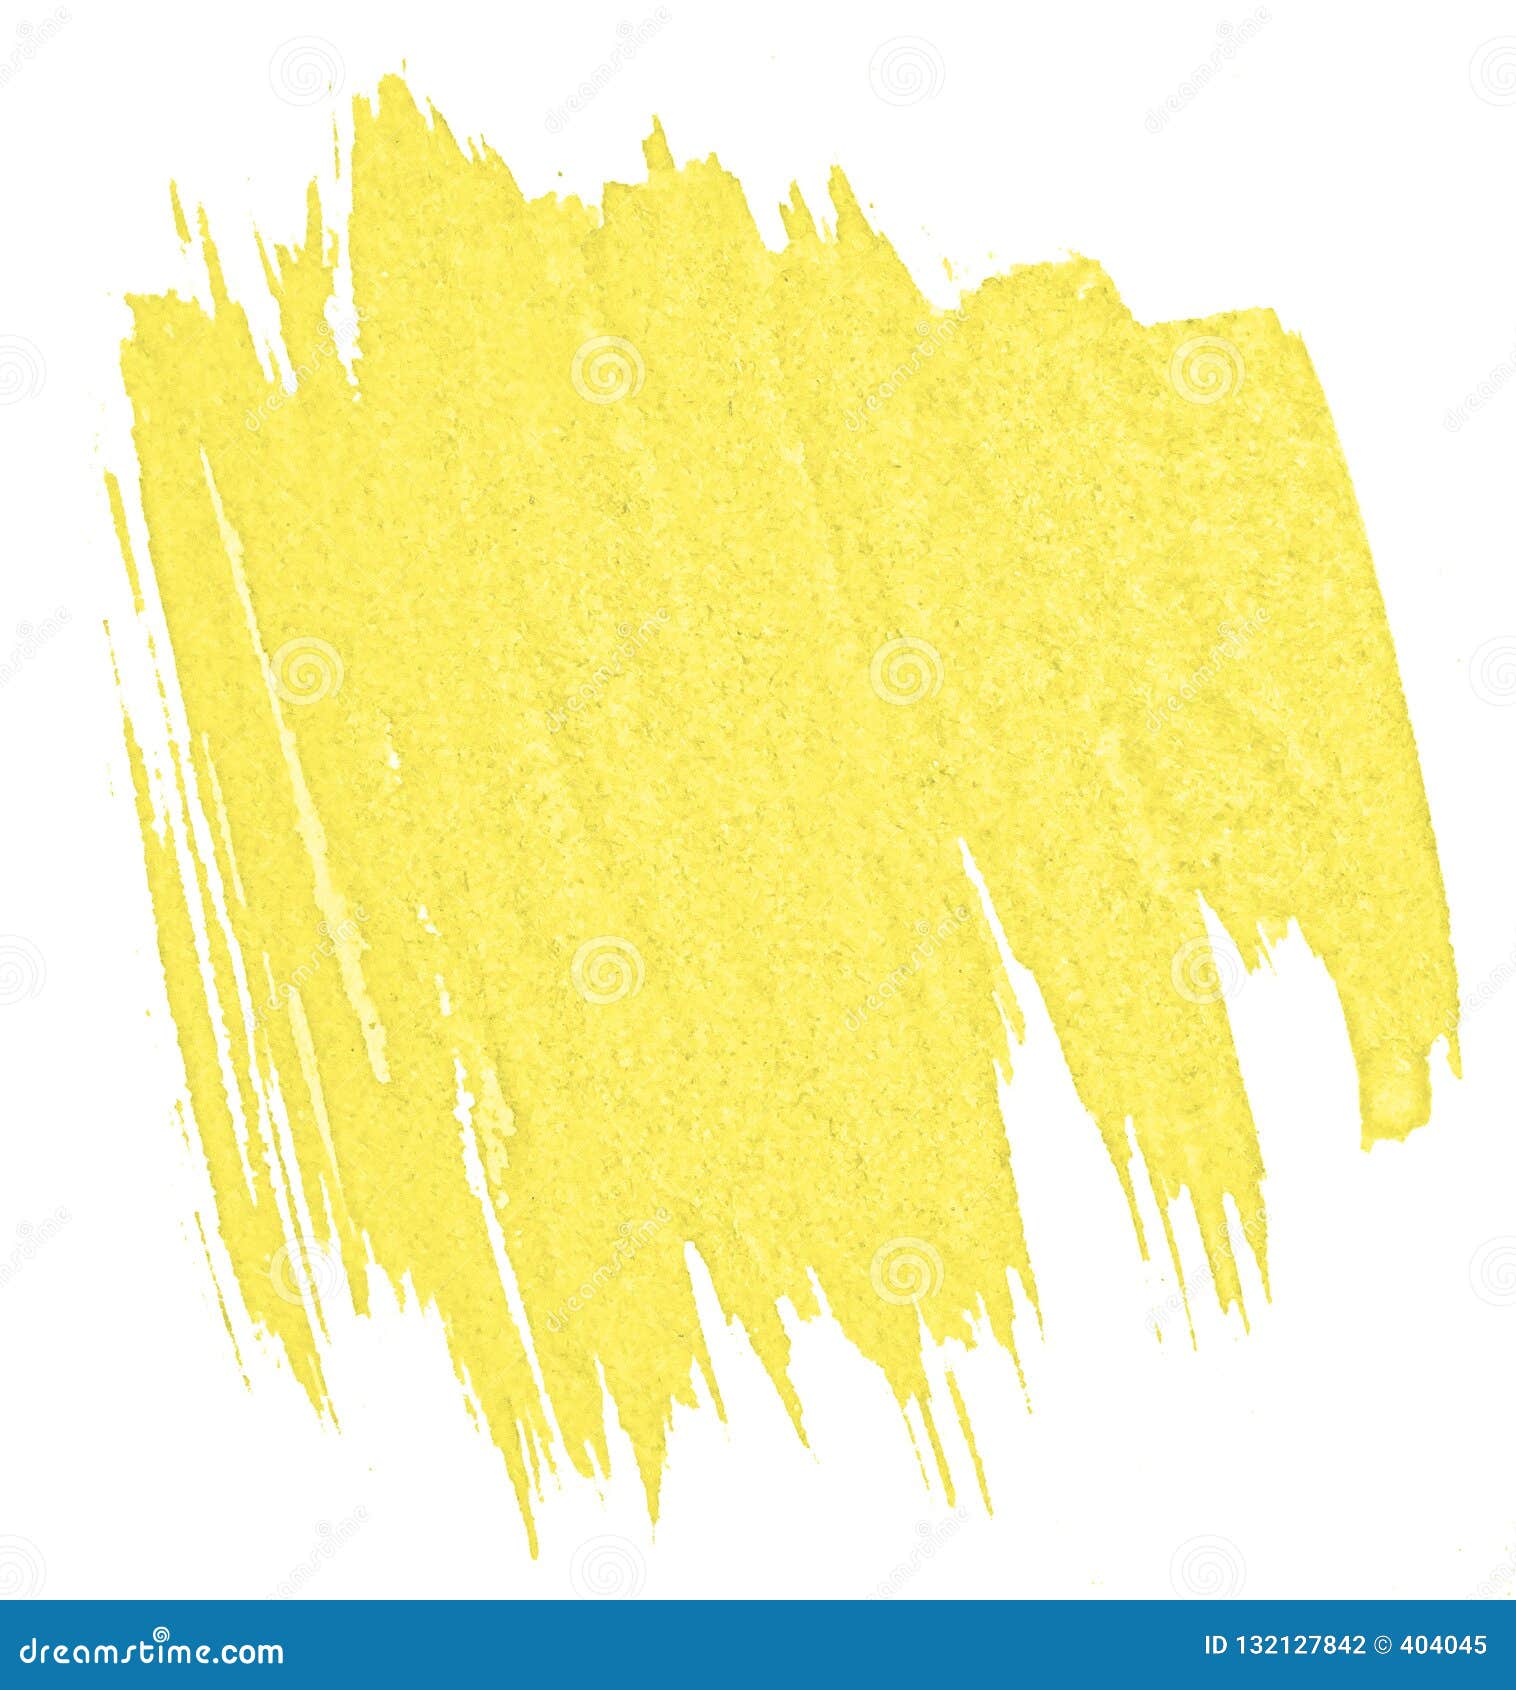 Bright Yellow Watercolor Abstract Background, Spot, Splash of Paint ...